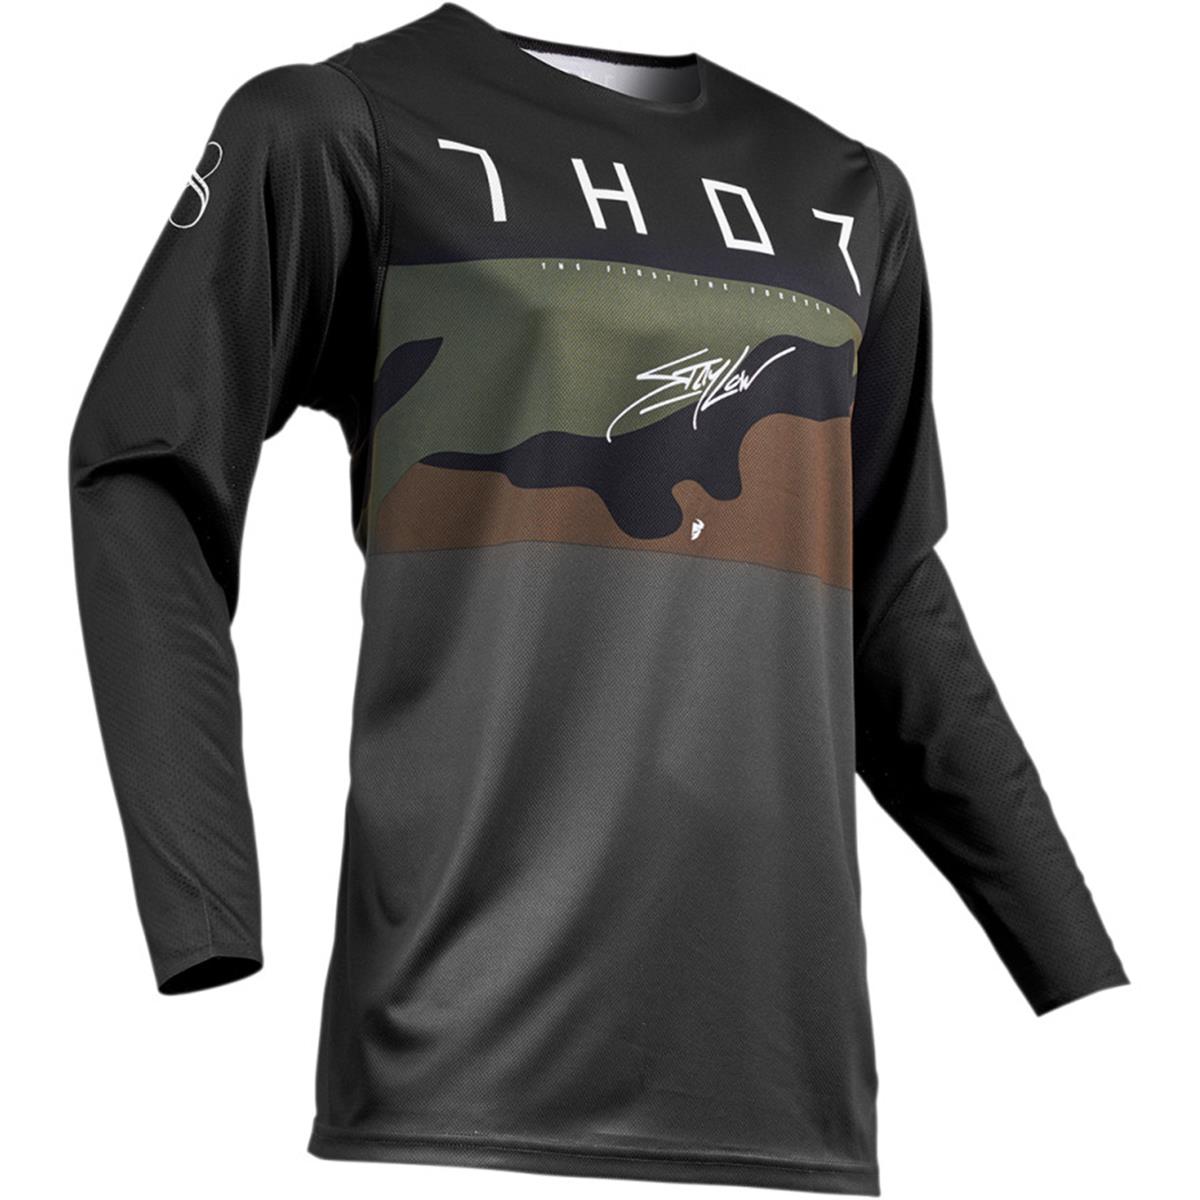 Thor Jersey Prime Pro Fighter - Charcoal/Camo